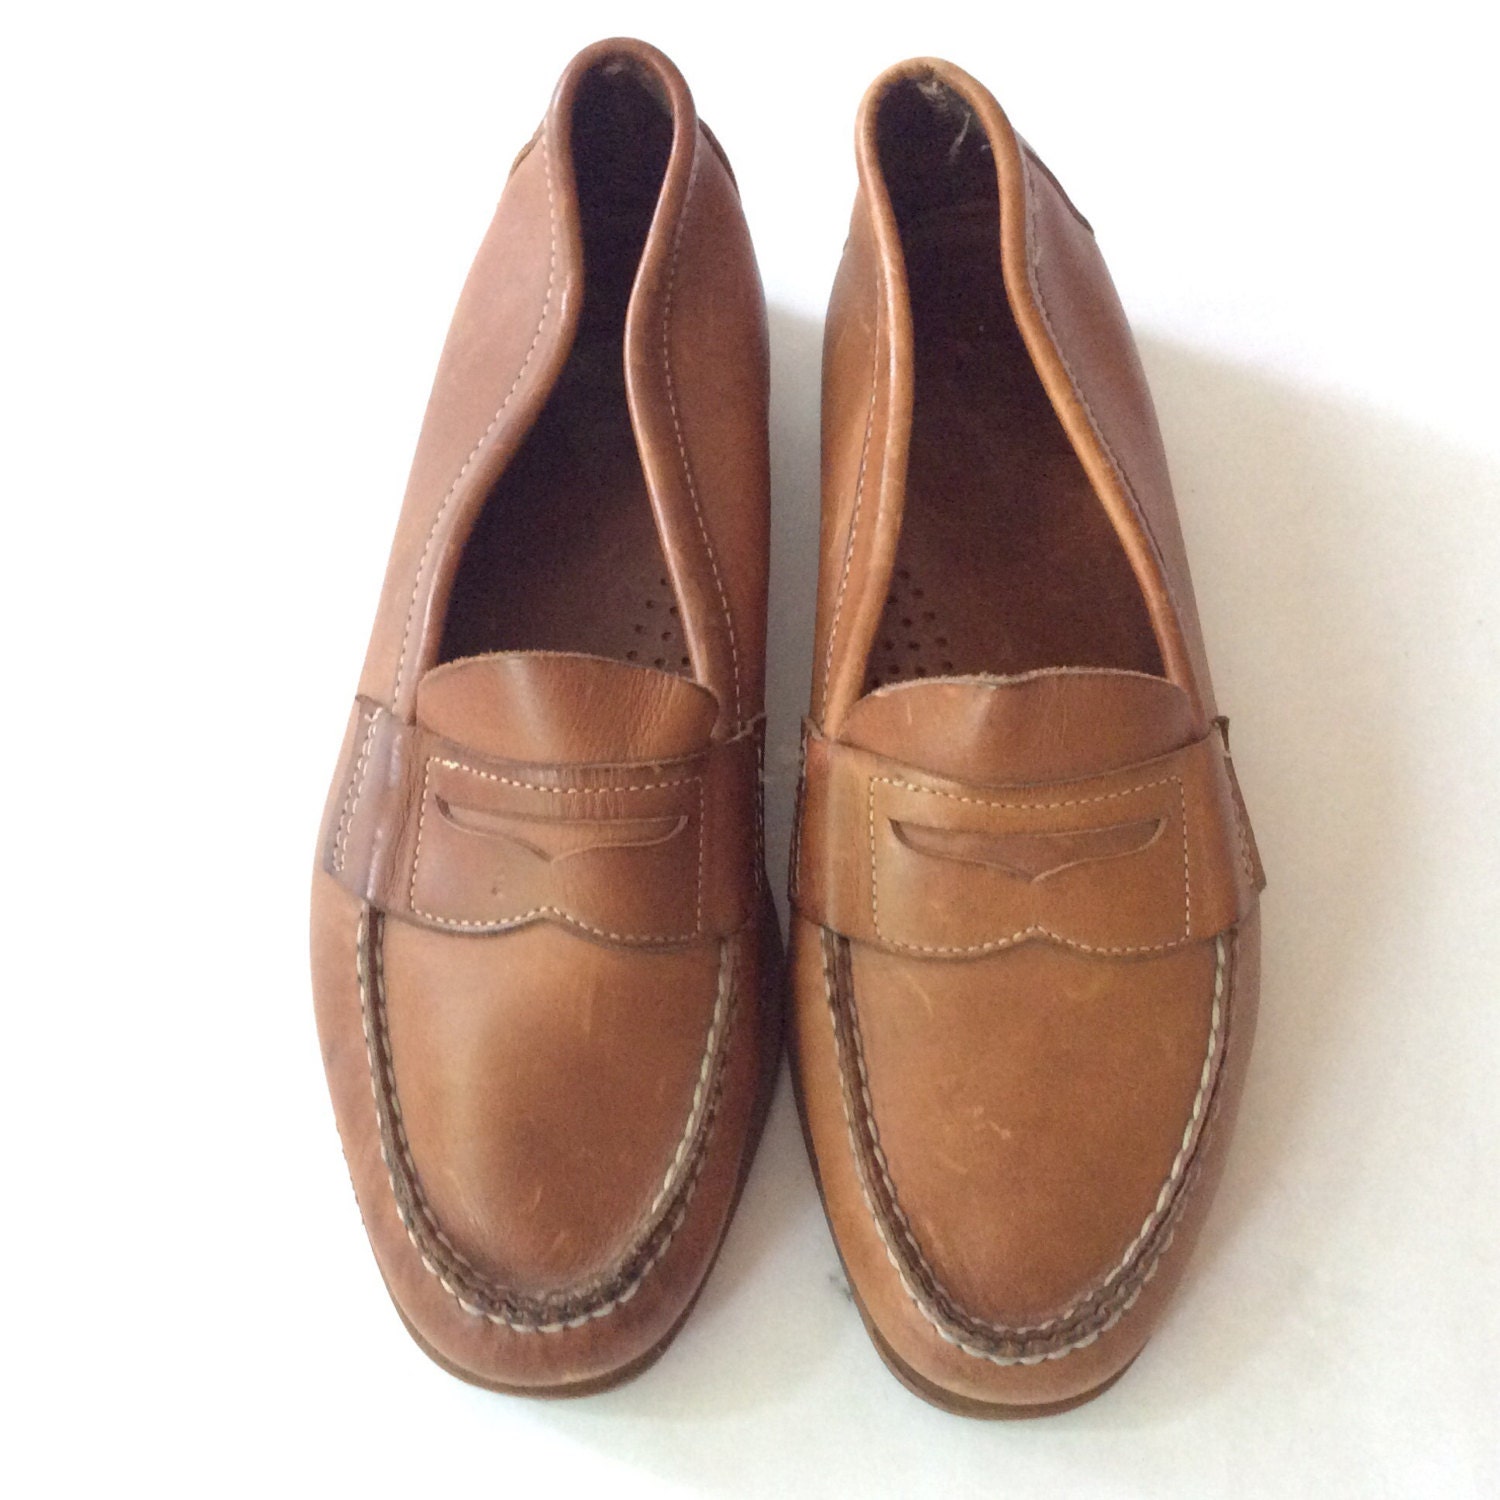 Vintage Leather Men's Loafers Shoes Penny Loafers Size